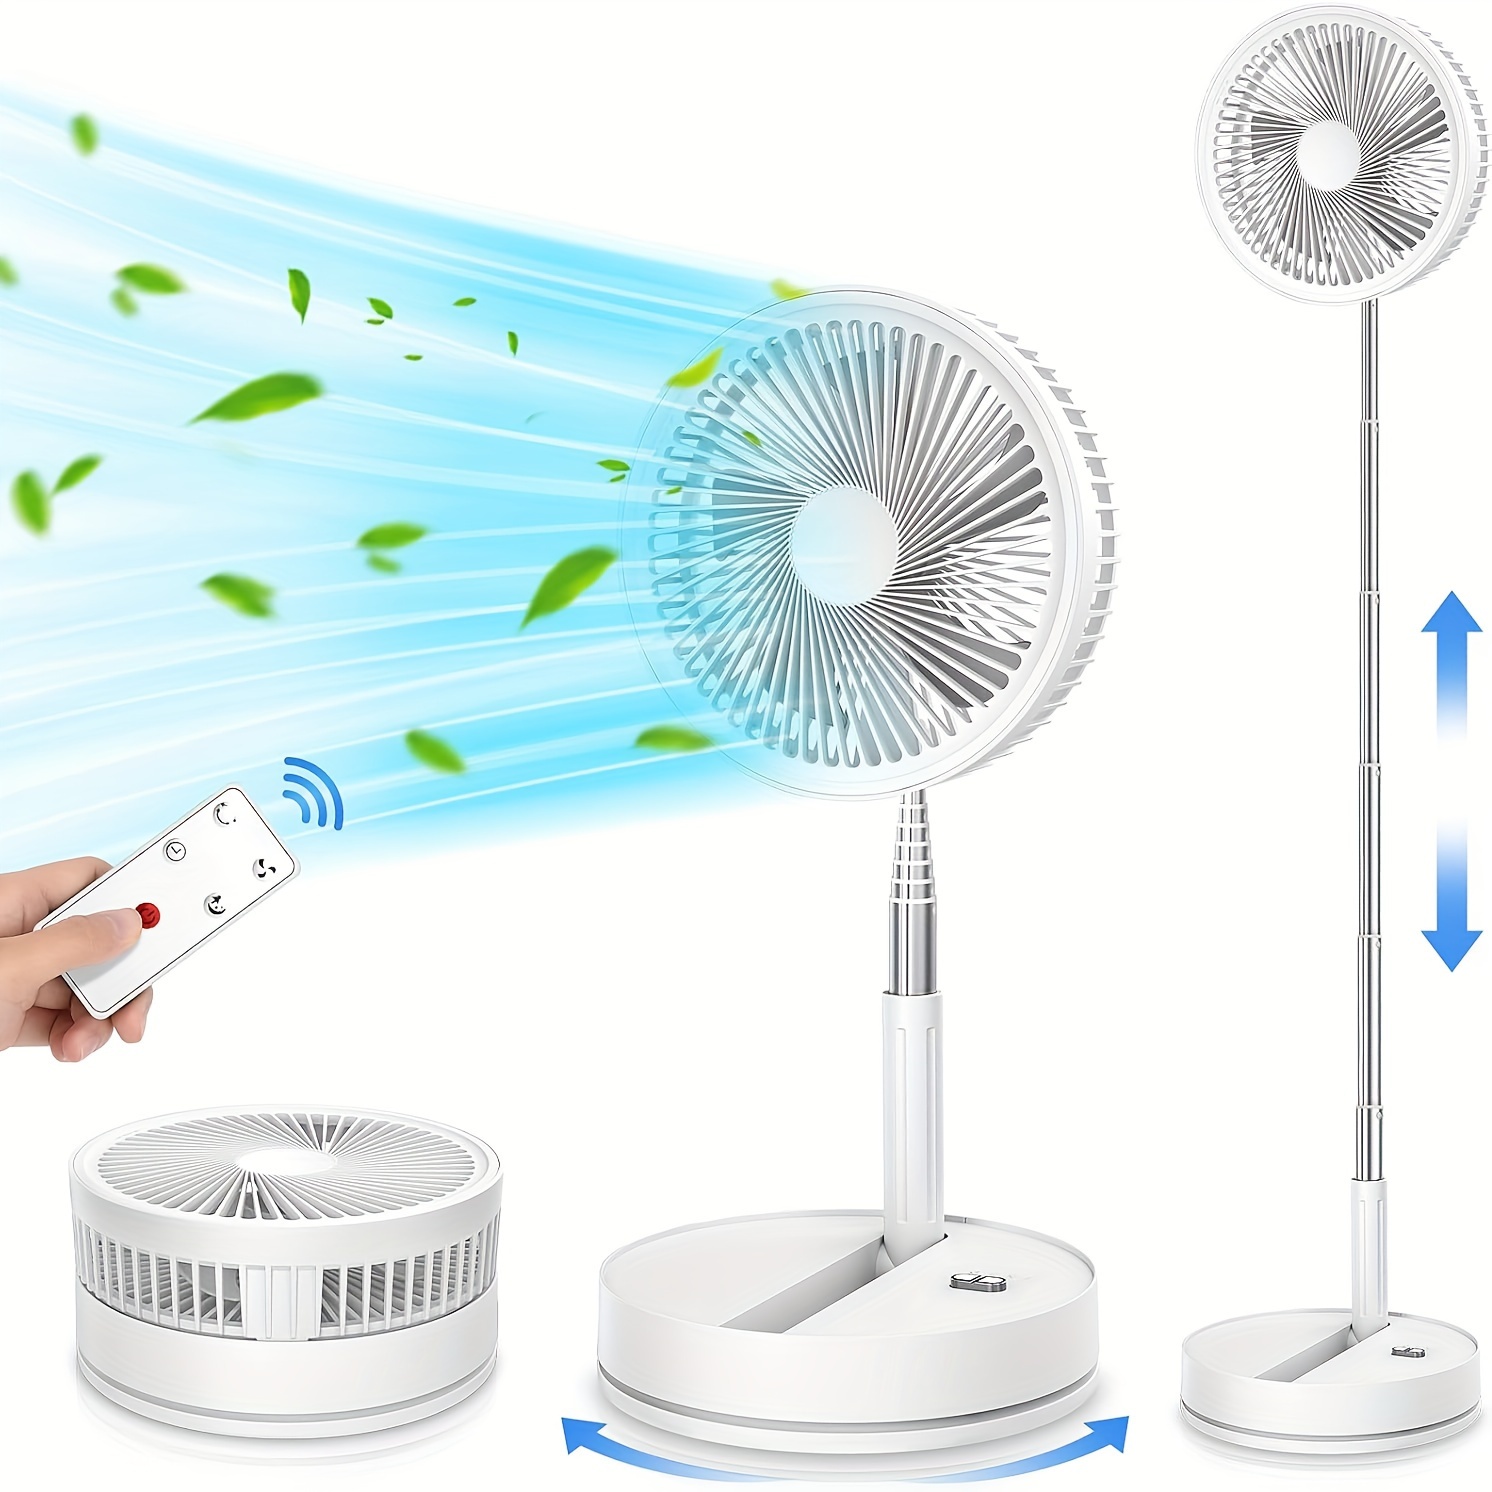 

9" Portable Standing Oscillating Fan With Remote - 7200mah Rechargeable Battery Tall Floor Foldable Travel Fan For Sleeping - Pedestal Stand Up Folding Bed Fan For Home Bedroom